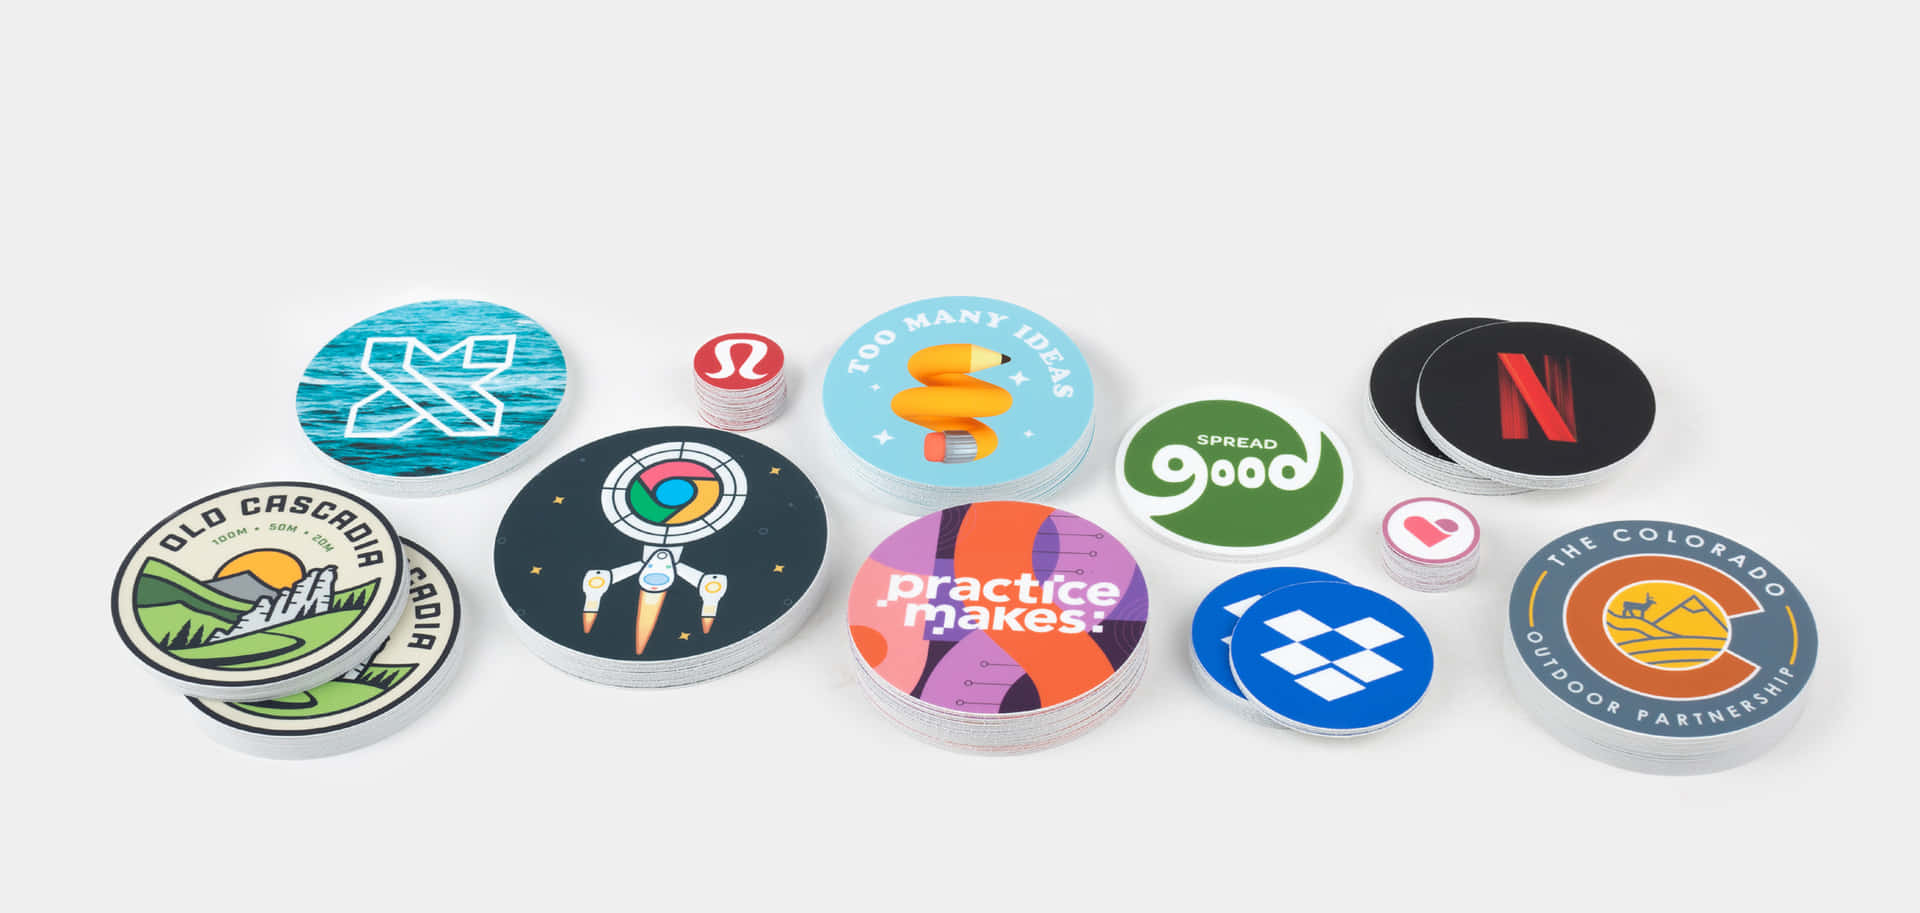 A Group Of Stickers With Different Logos And Designs